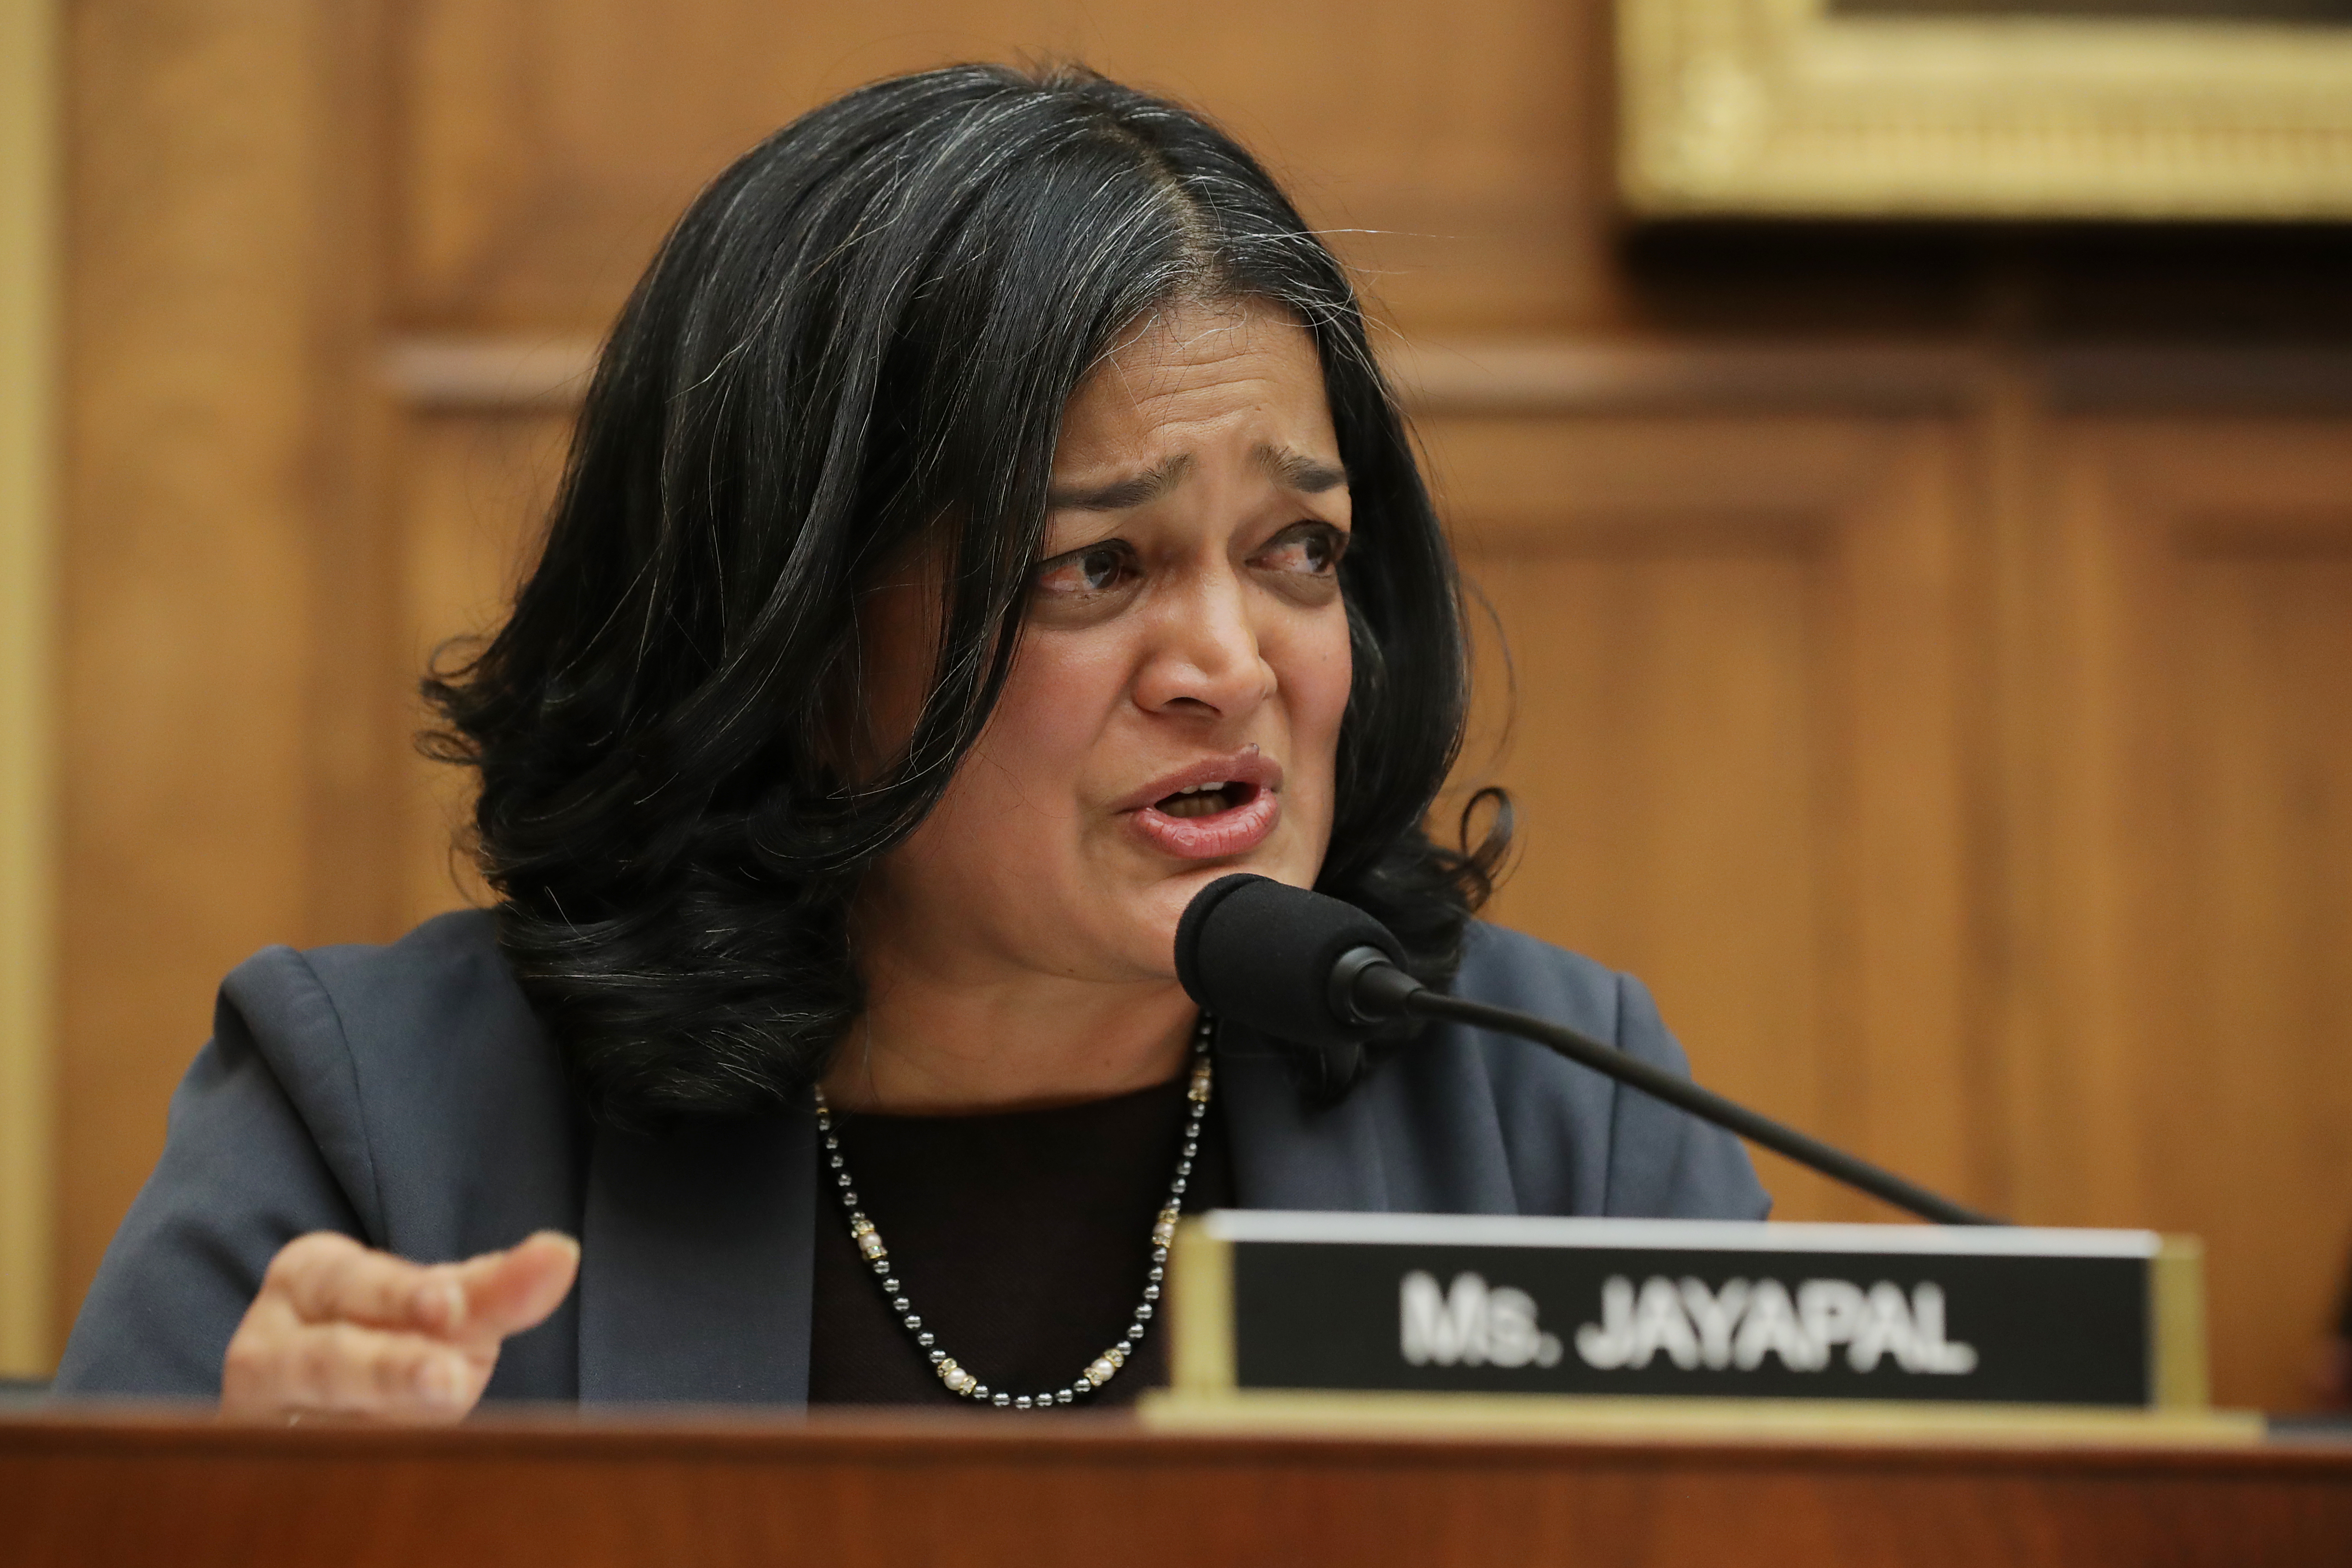 Rep. Pramila Jayapal questions witnesses during a hearing of the House Judiciary Committee's Antitrust, Commercial and Administrative Law Subcommittee in the Rayburn House Office Building on Capitol Hill March 12, 2019 in Washington, DC. (Photo by Chip Somodevilla/Getty Images)